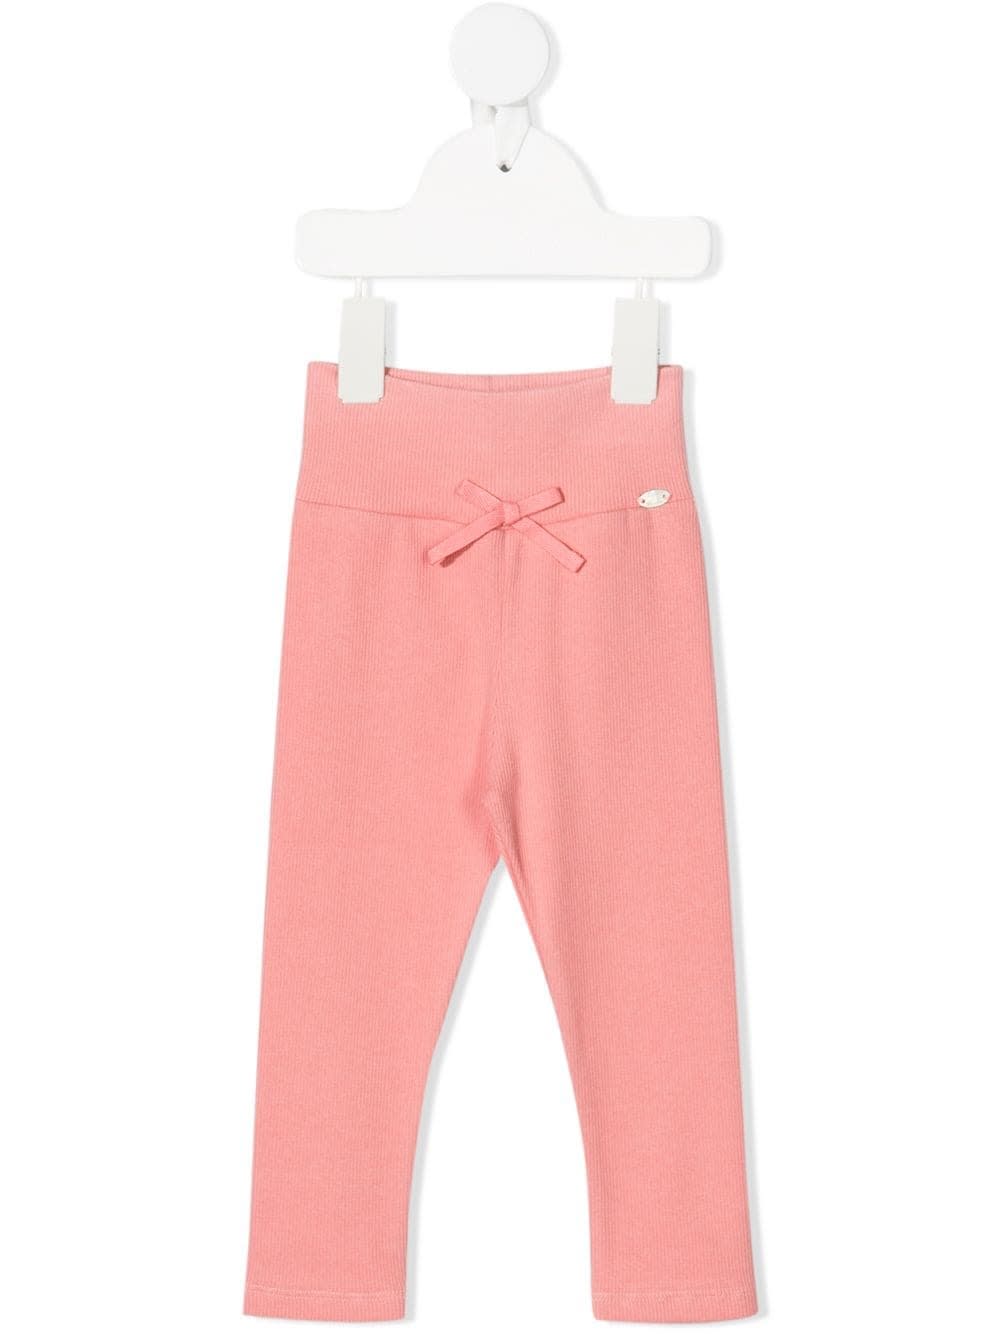 TARTINE ET CHOCOLAT TROUSSEAU LEGGINGS IN PINK RIBBED COTTON WITH BOW,11800541